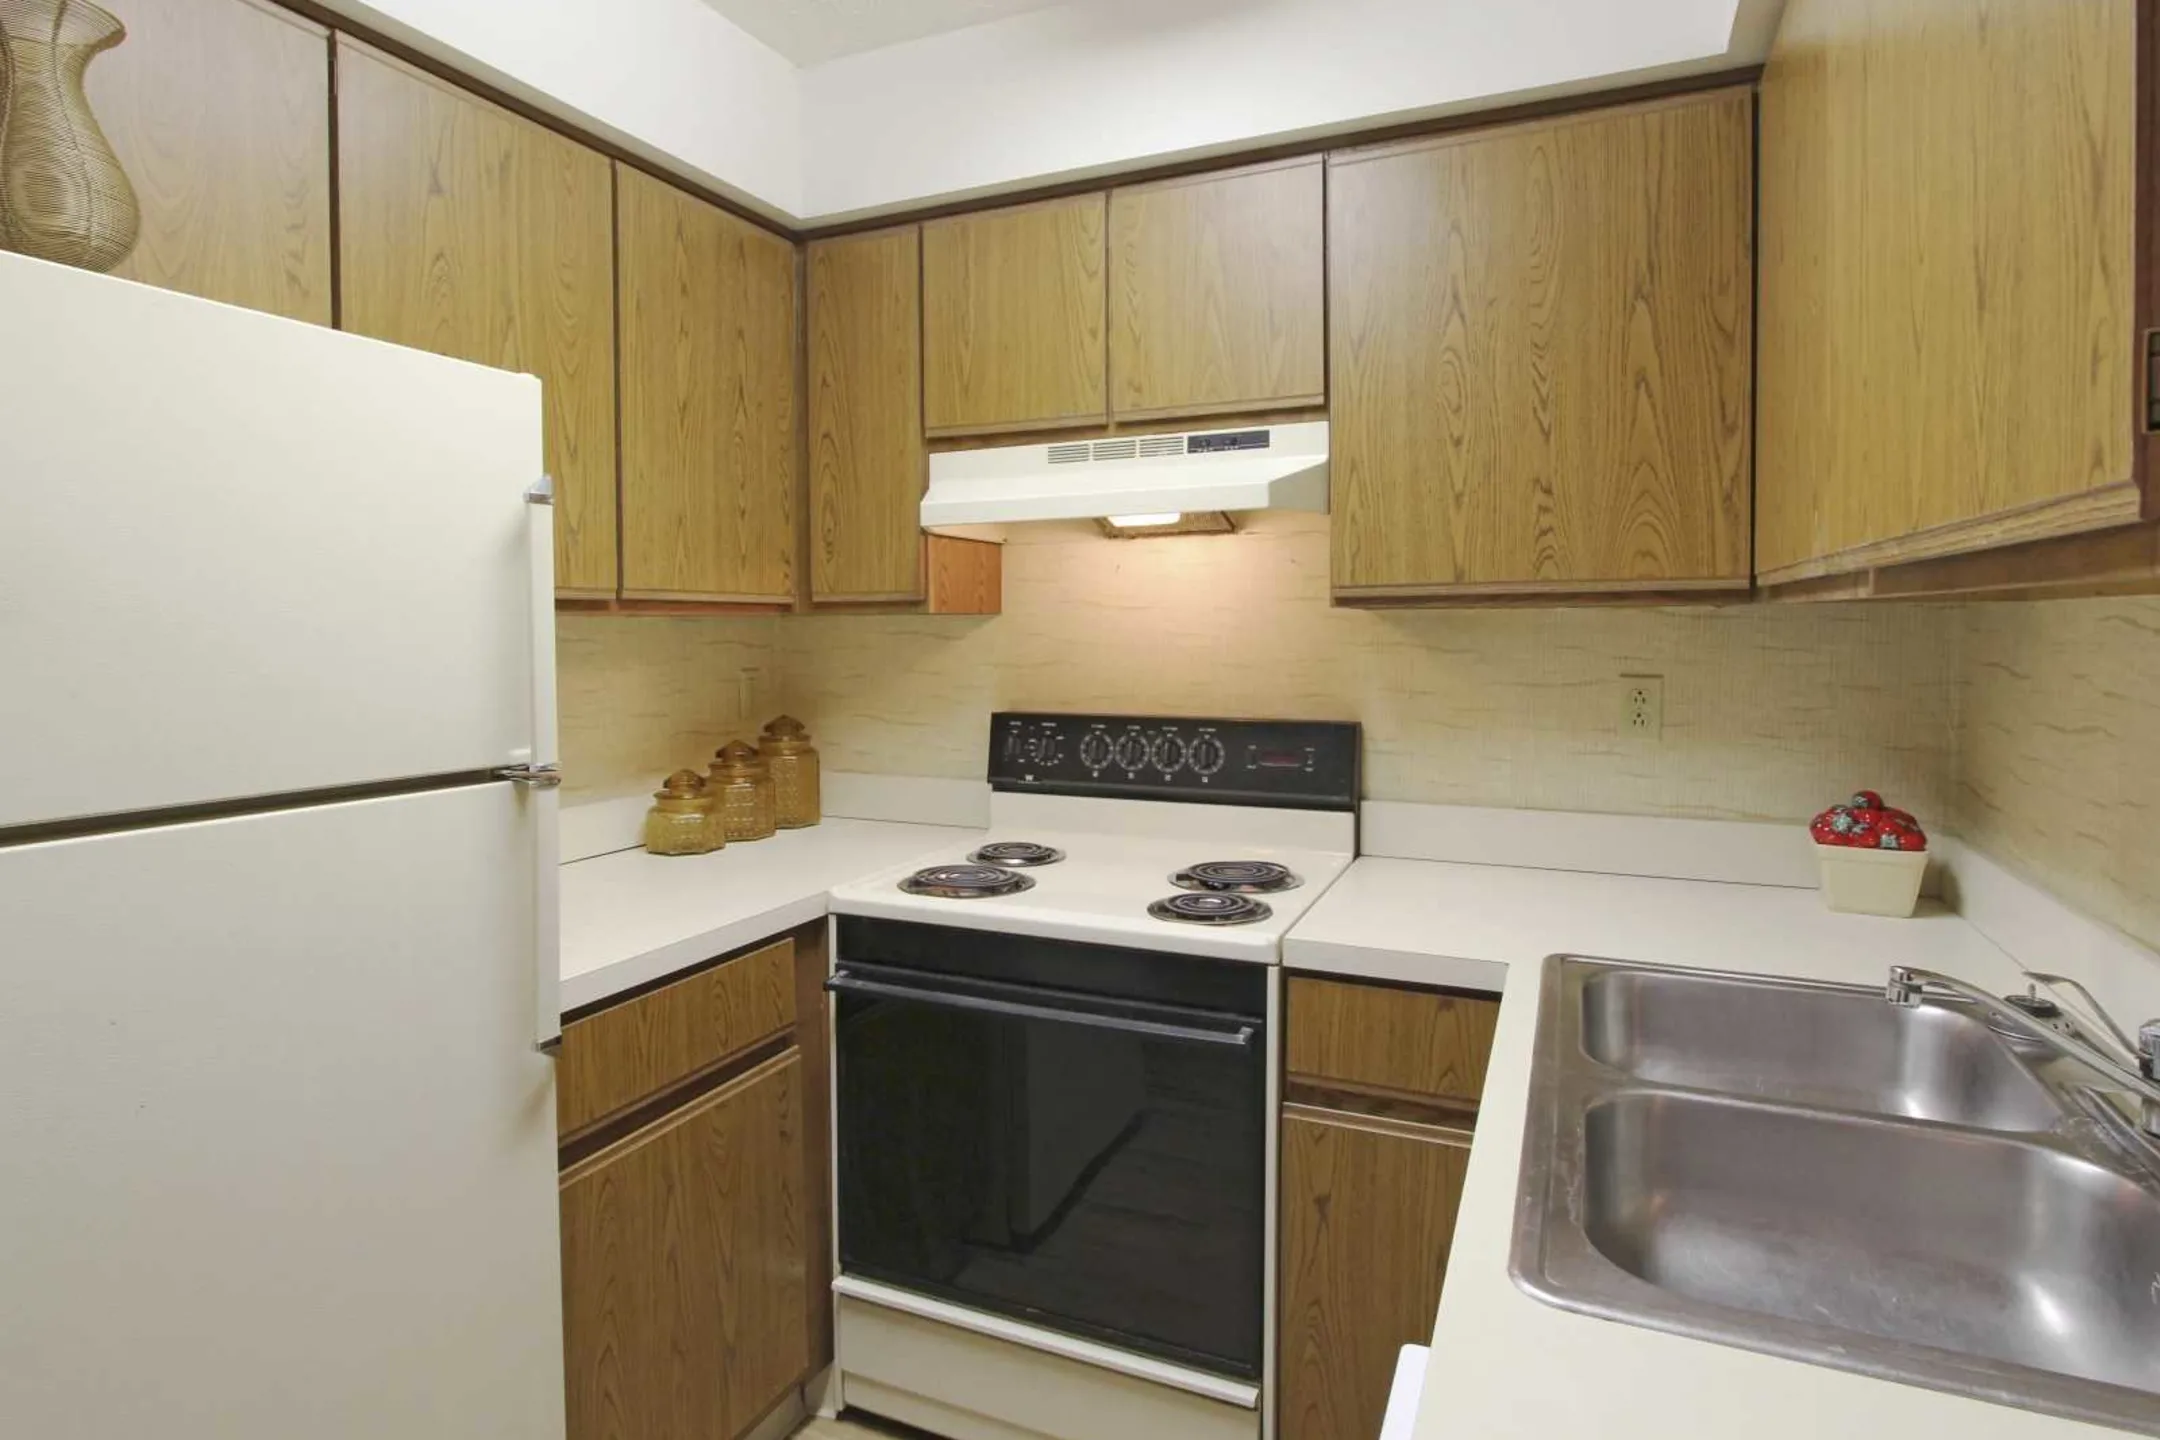 Kitchen - Timber Top Apartments & Townhomes - Akron, OH